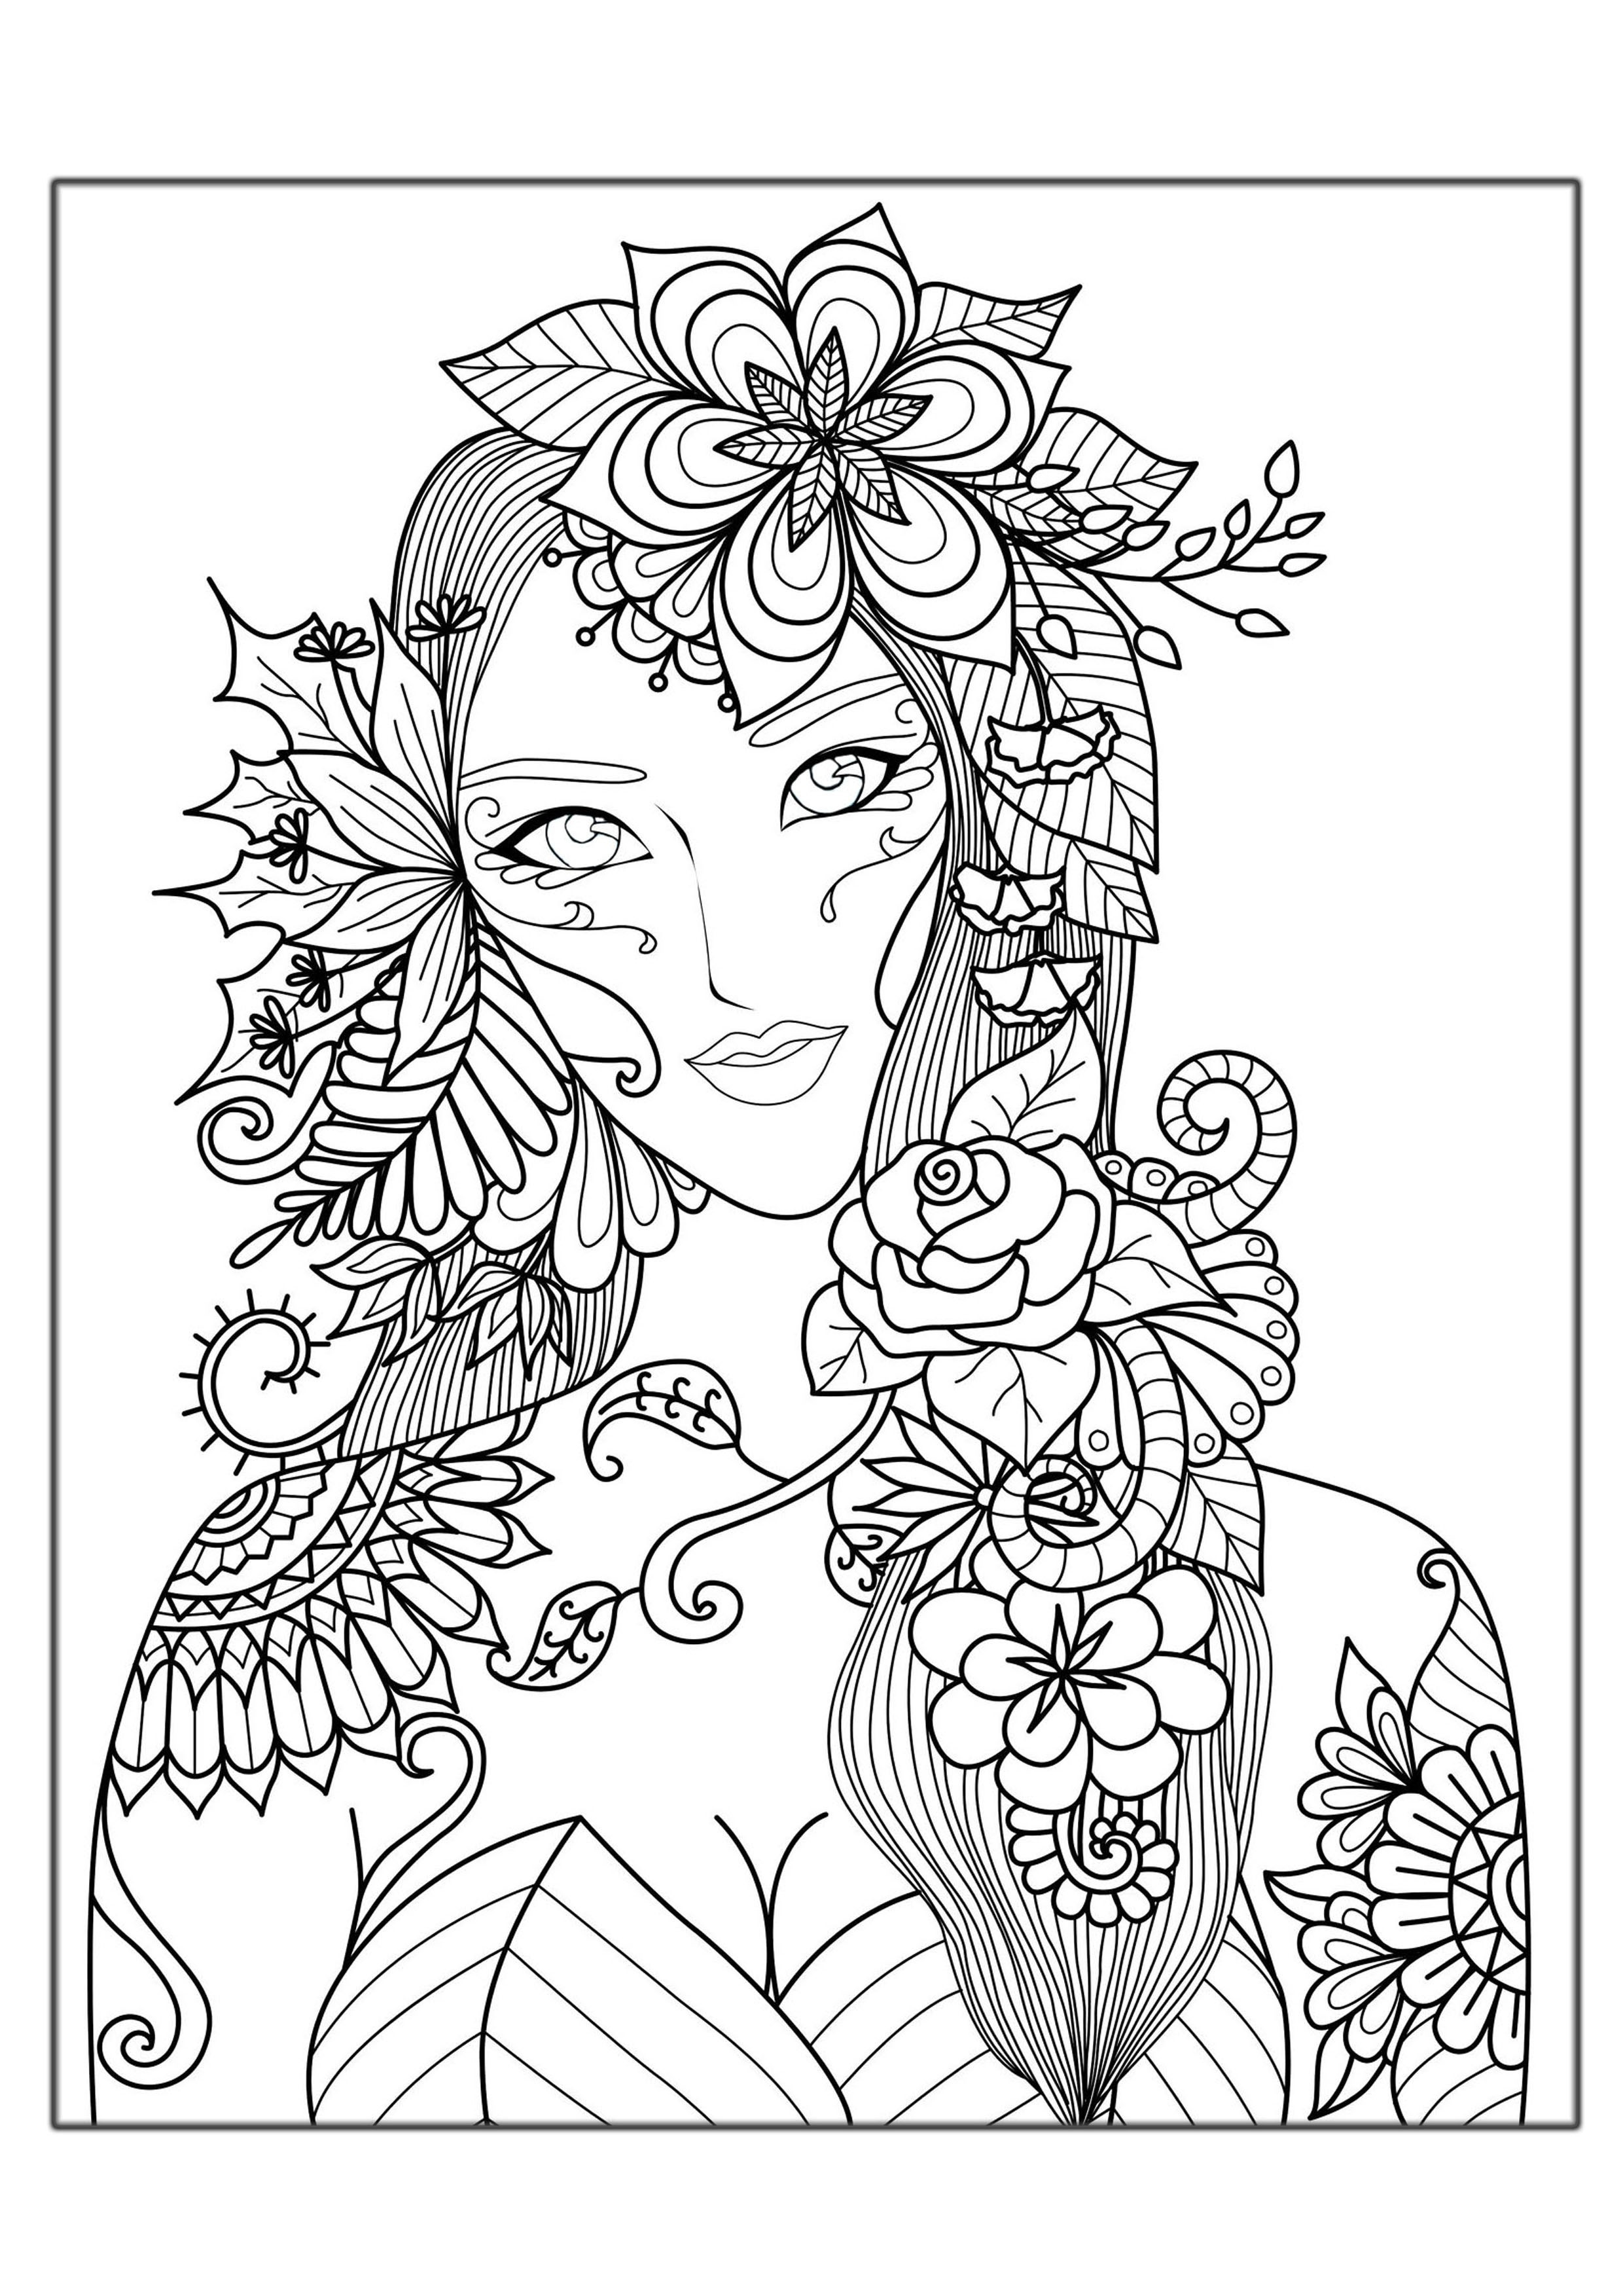 Fun Coloring Pages For Boys Fall
 Fall Coloring Pages for Adults Best Coloring Pages For Kids